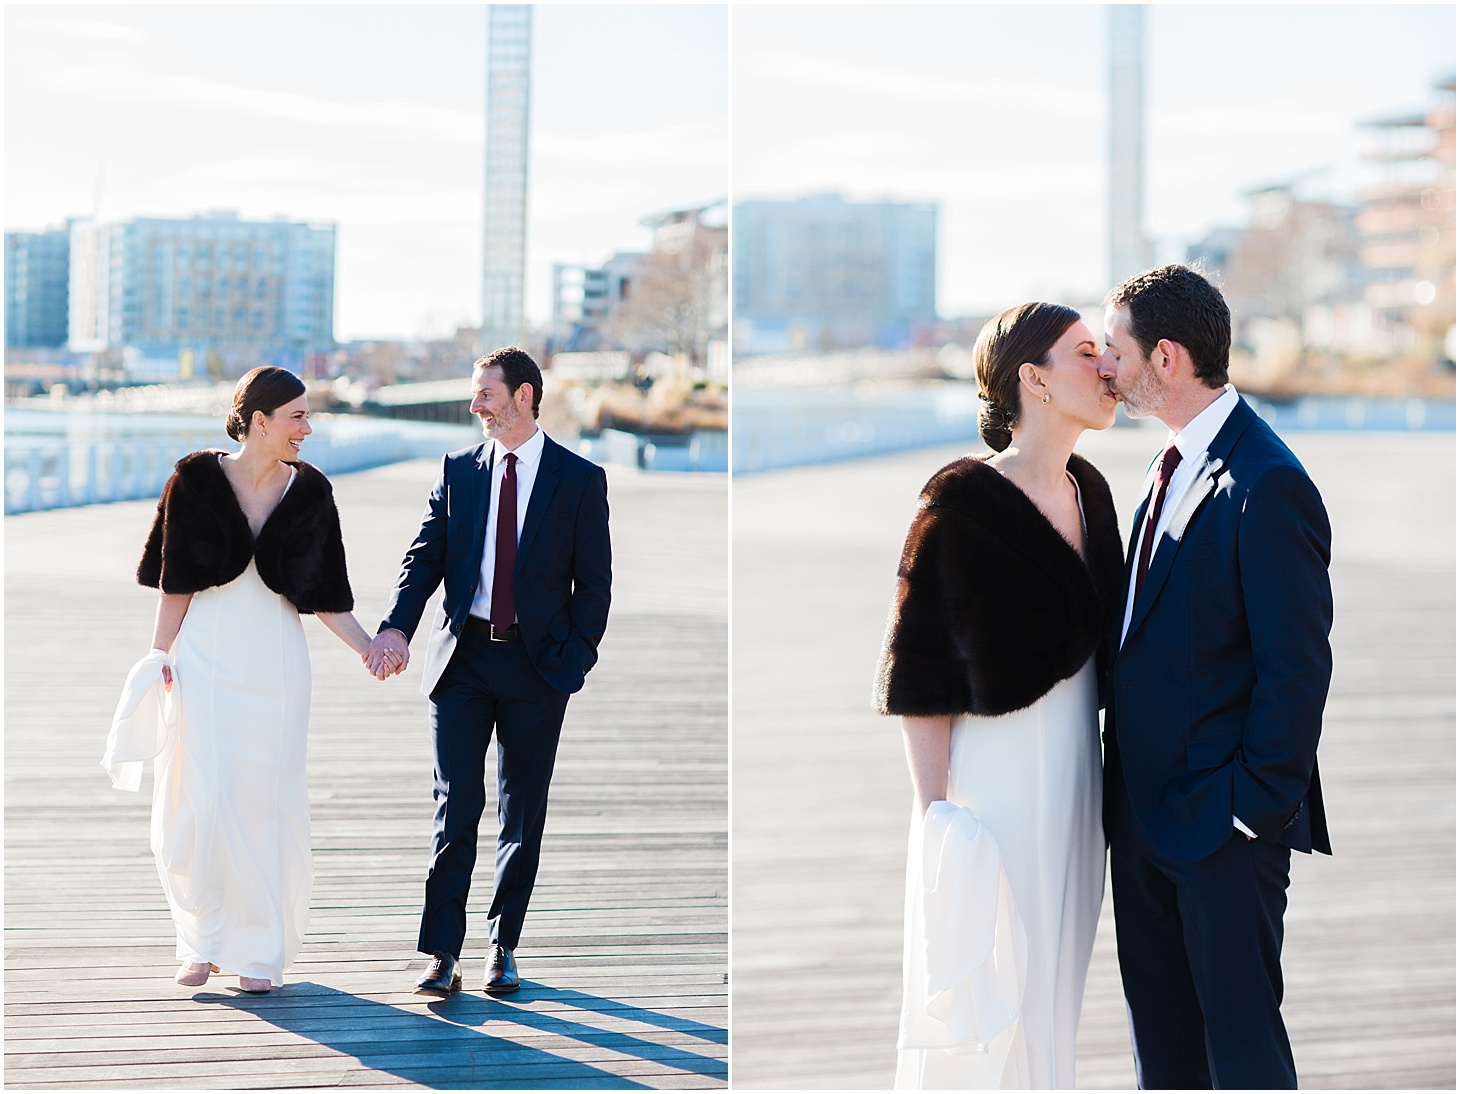 First Look at the Navy Yards | Ceremony at the Holy Rosary Church | Ceremony at the Holy Rosary Church | Burgundy and Blush DC Wedding at District Winery | Sarah Bradshaw Photography